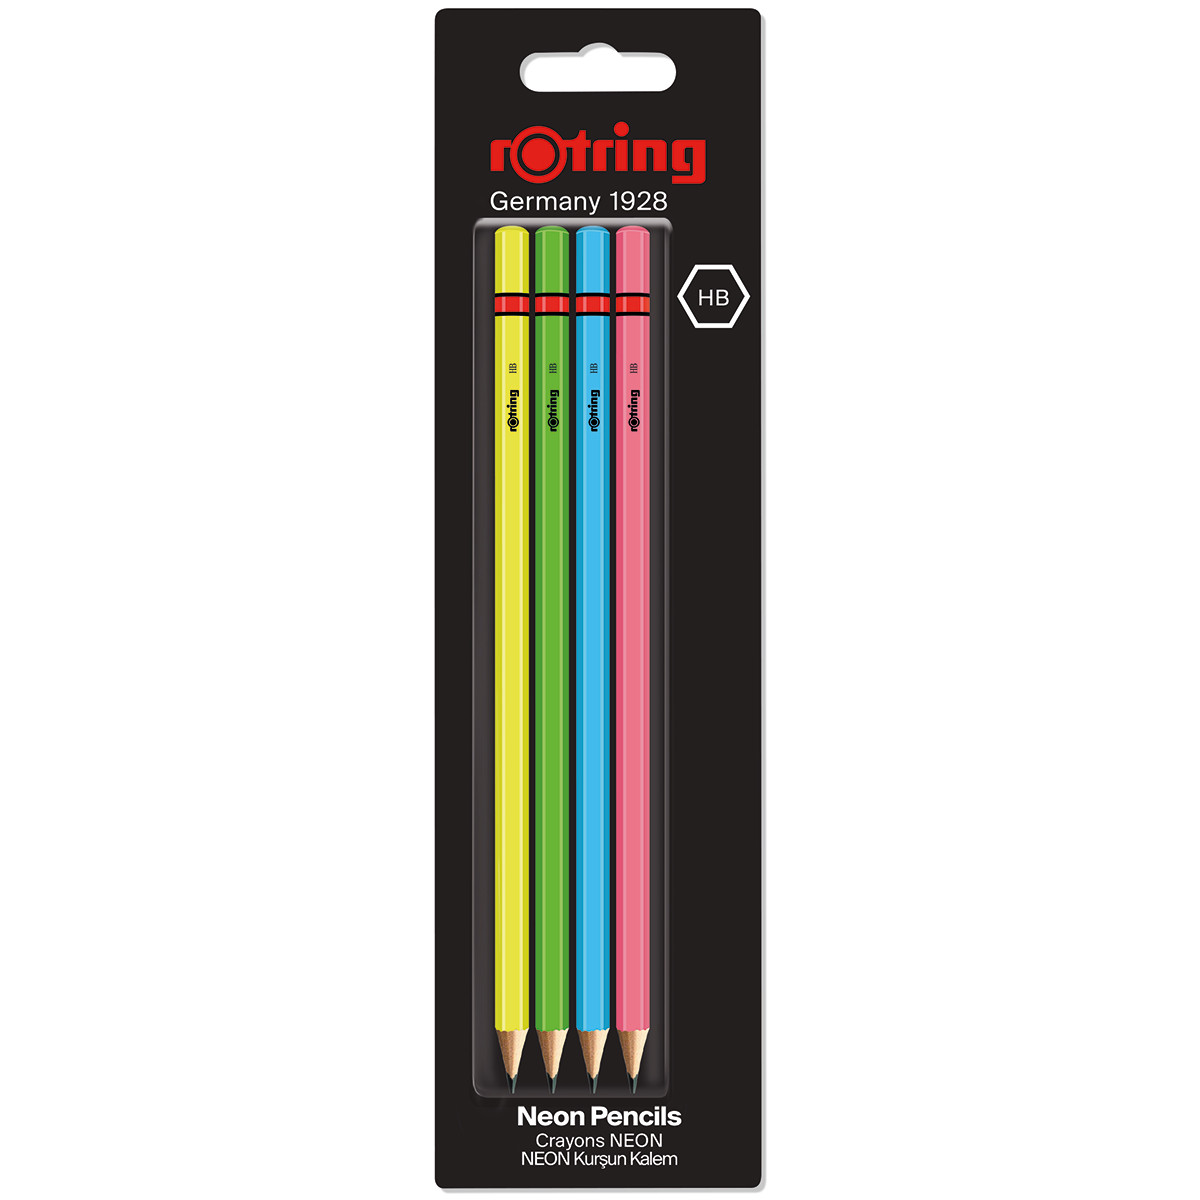 Rotring Woodcase pencil - Assorted Neon Colours - HB (Blister of 4)